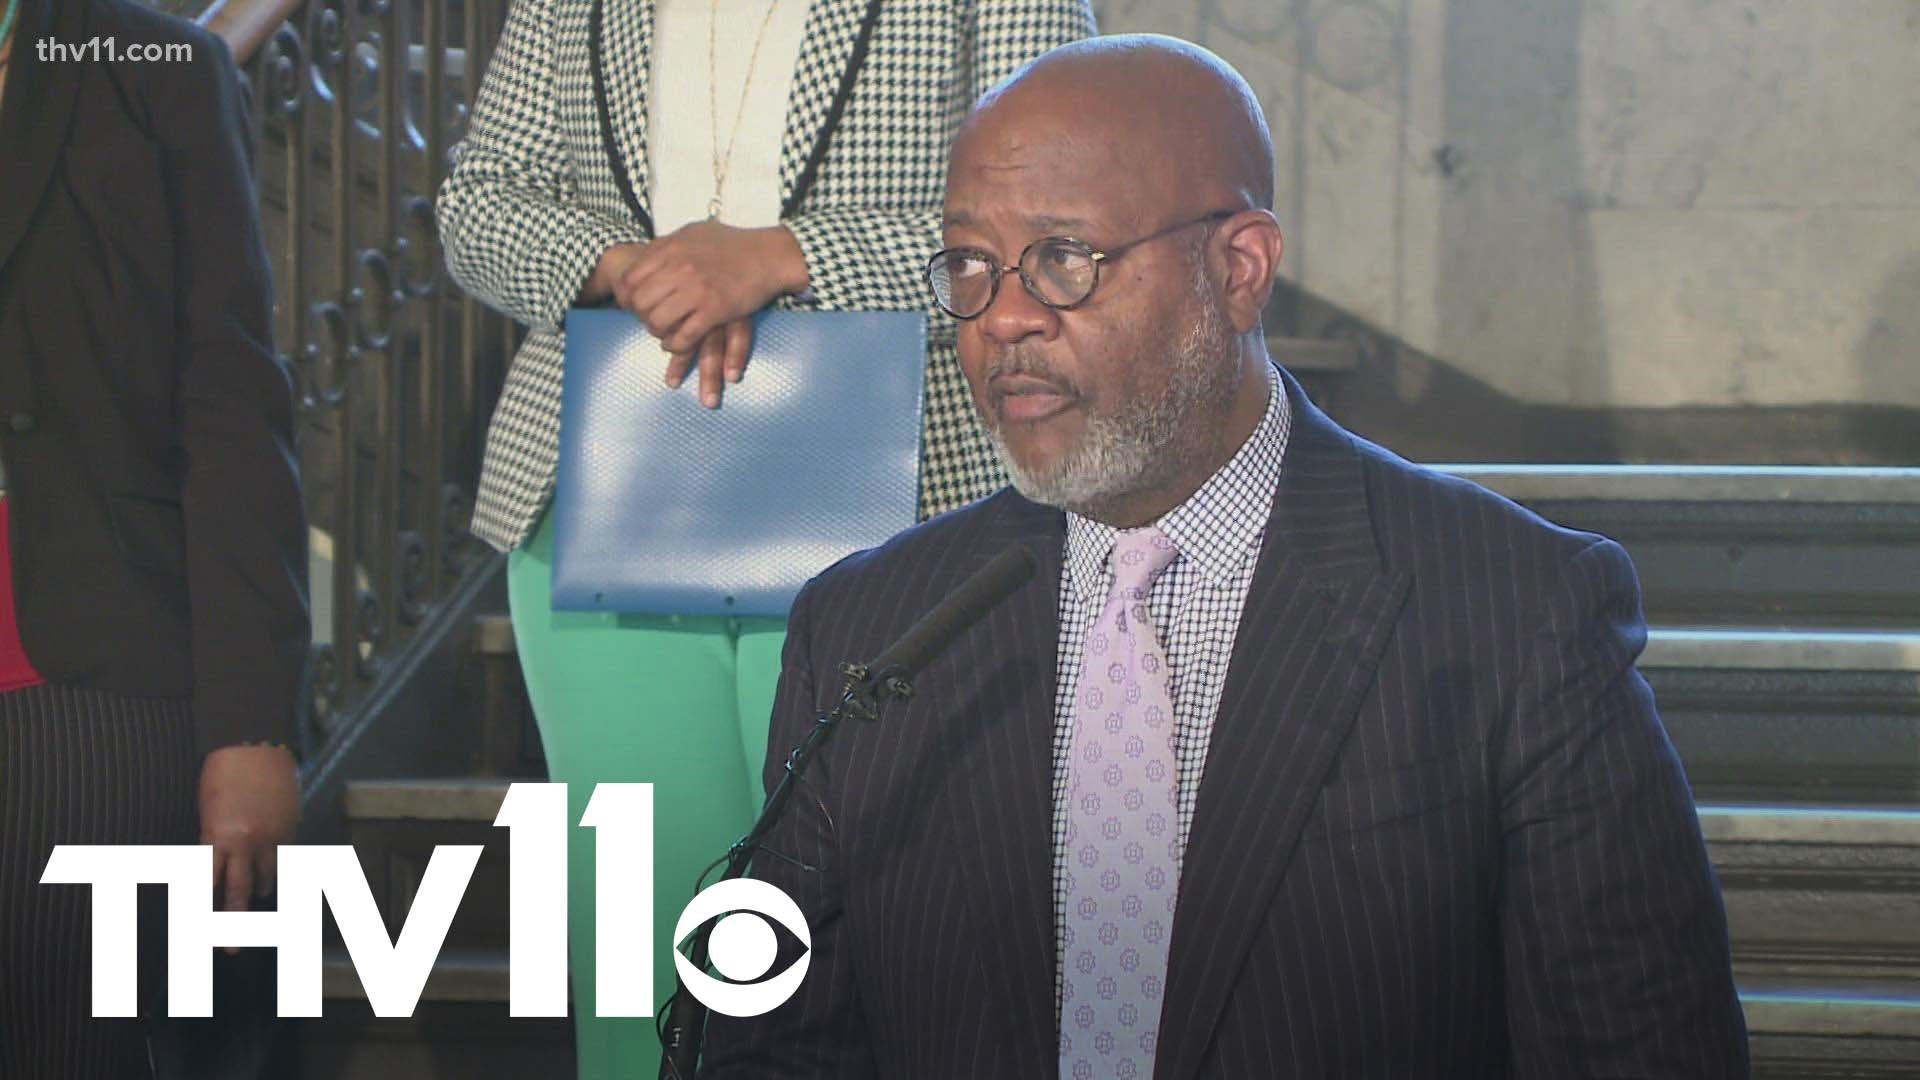 Little Rock Mayor Frank Scott Jr. held his weekly crime briefing, focusing on domestic violence, which accounts for 1/3 of the homicides that have happened in 2022.